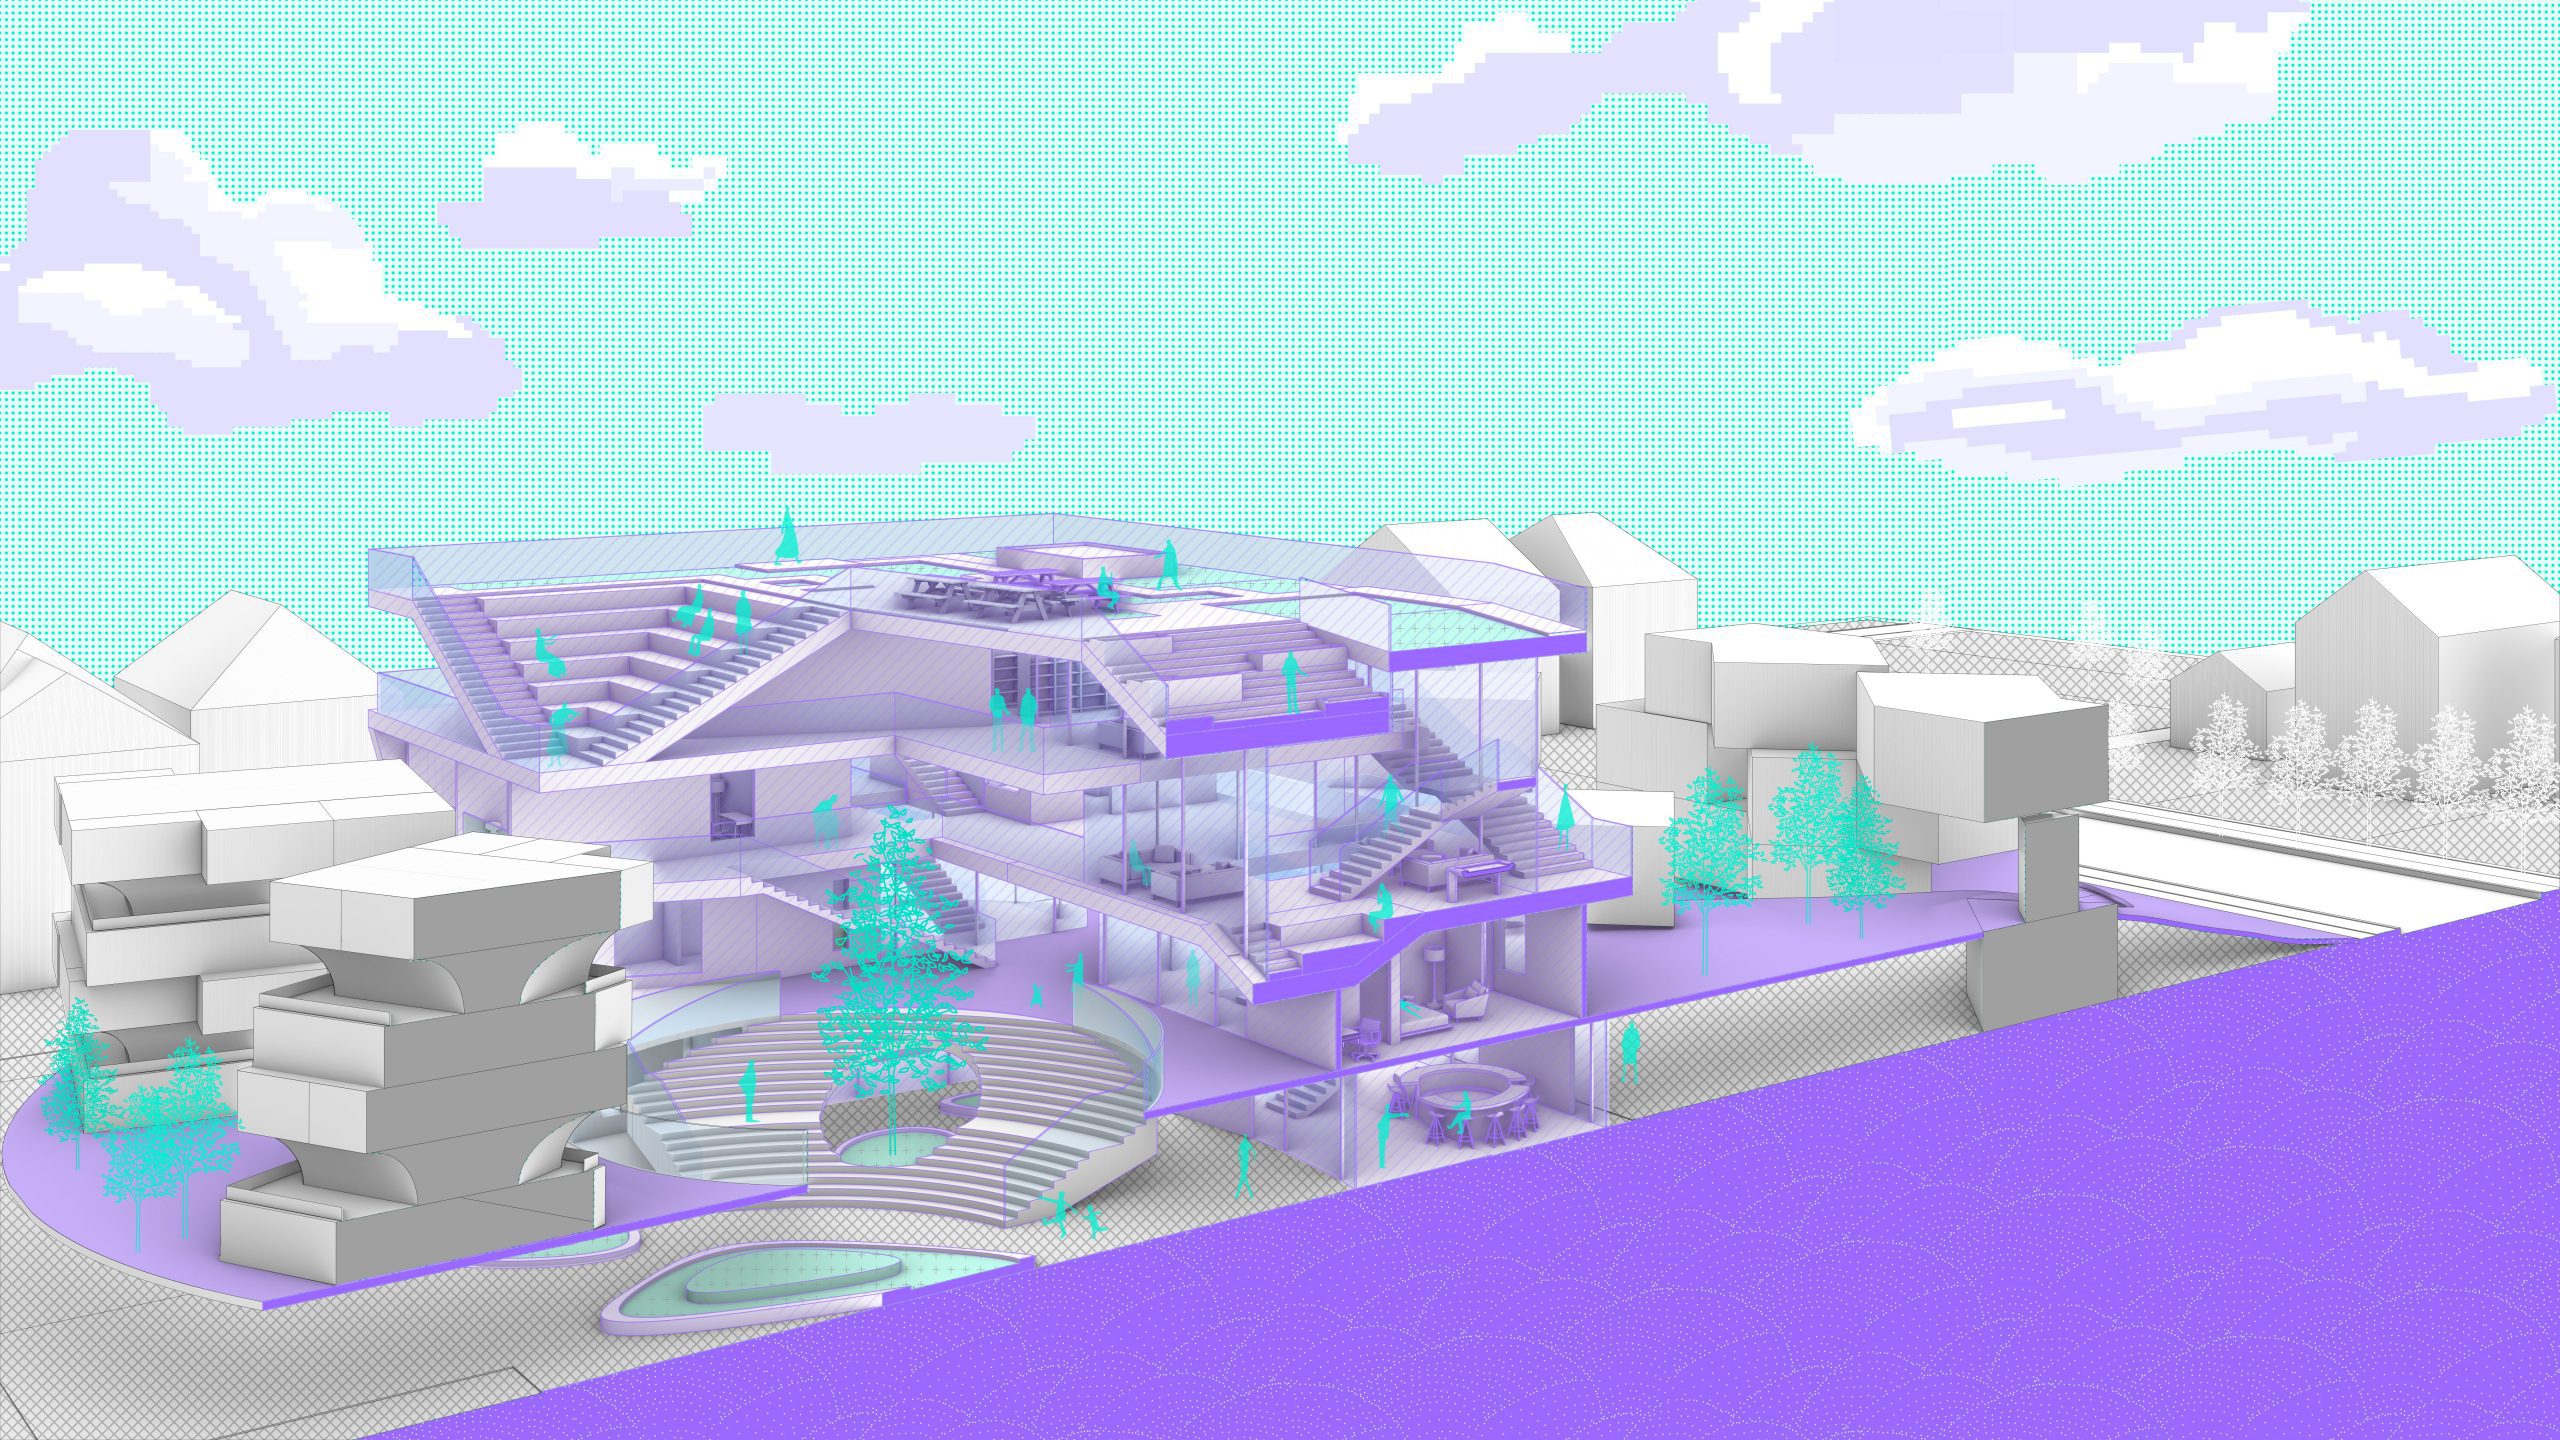 rendered isometric view of purple, white and teal architecture building